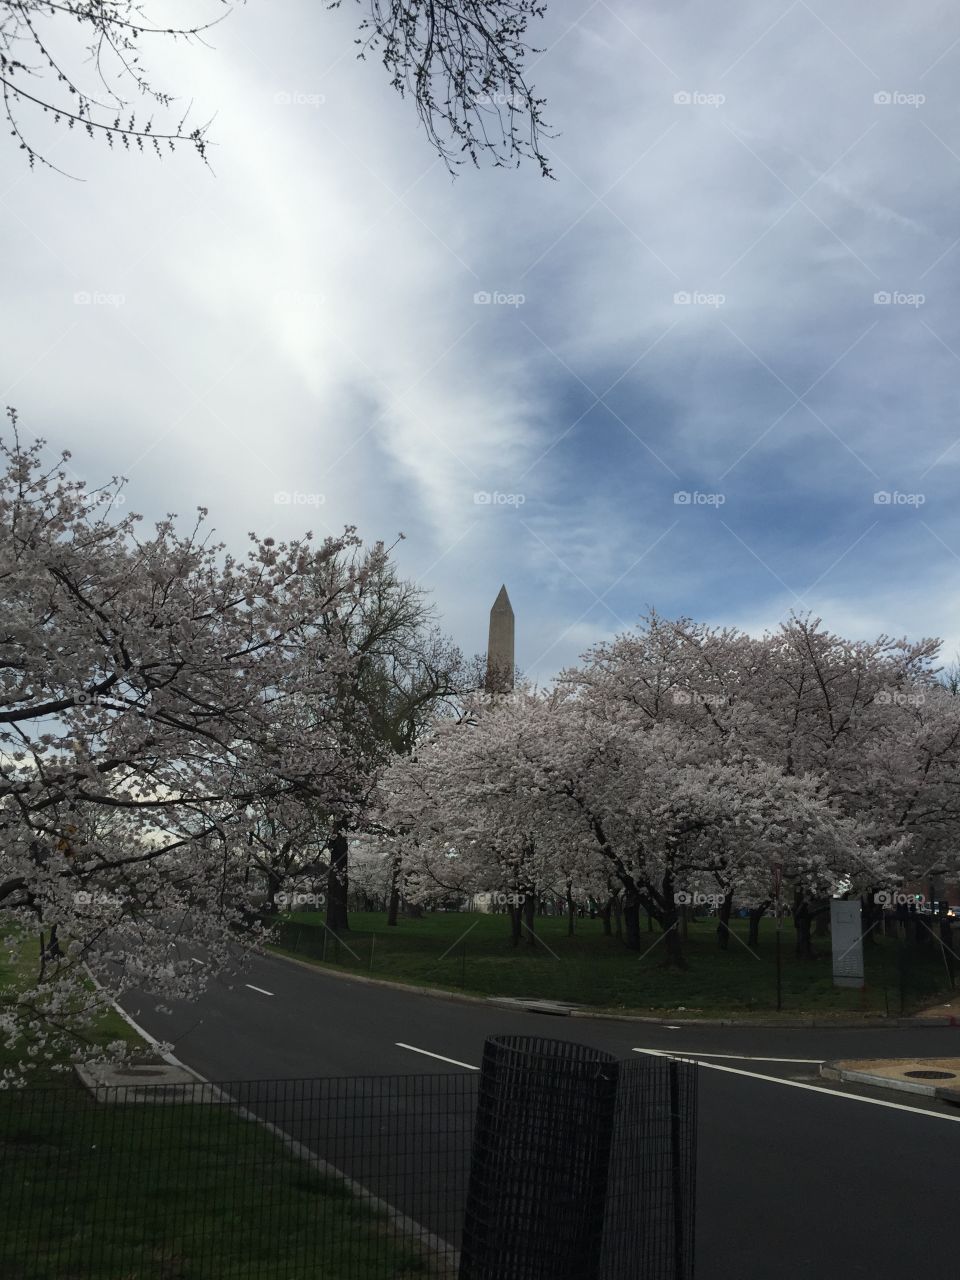 Washington Monument Among Cherry Blossoms. Washington Monument is surrounded by beautiful cherry blossoms.